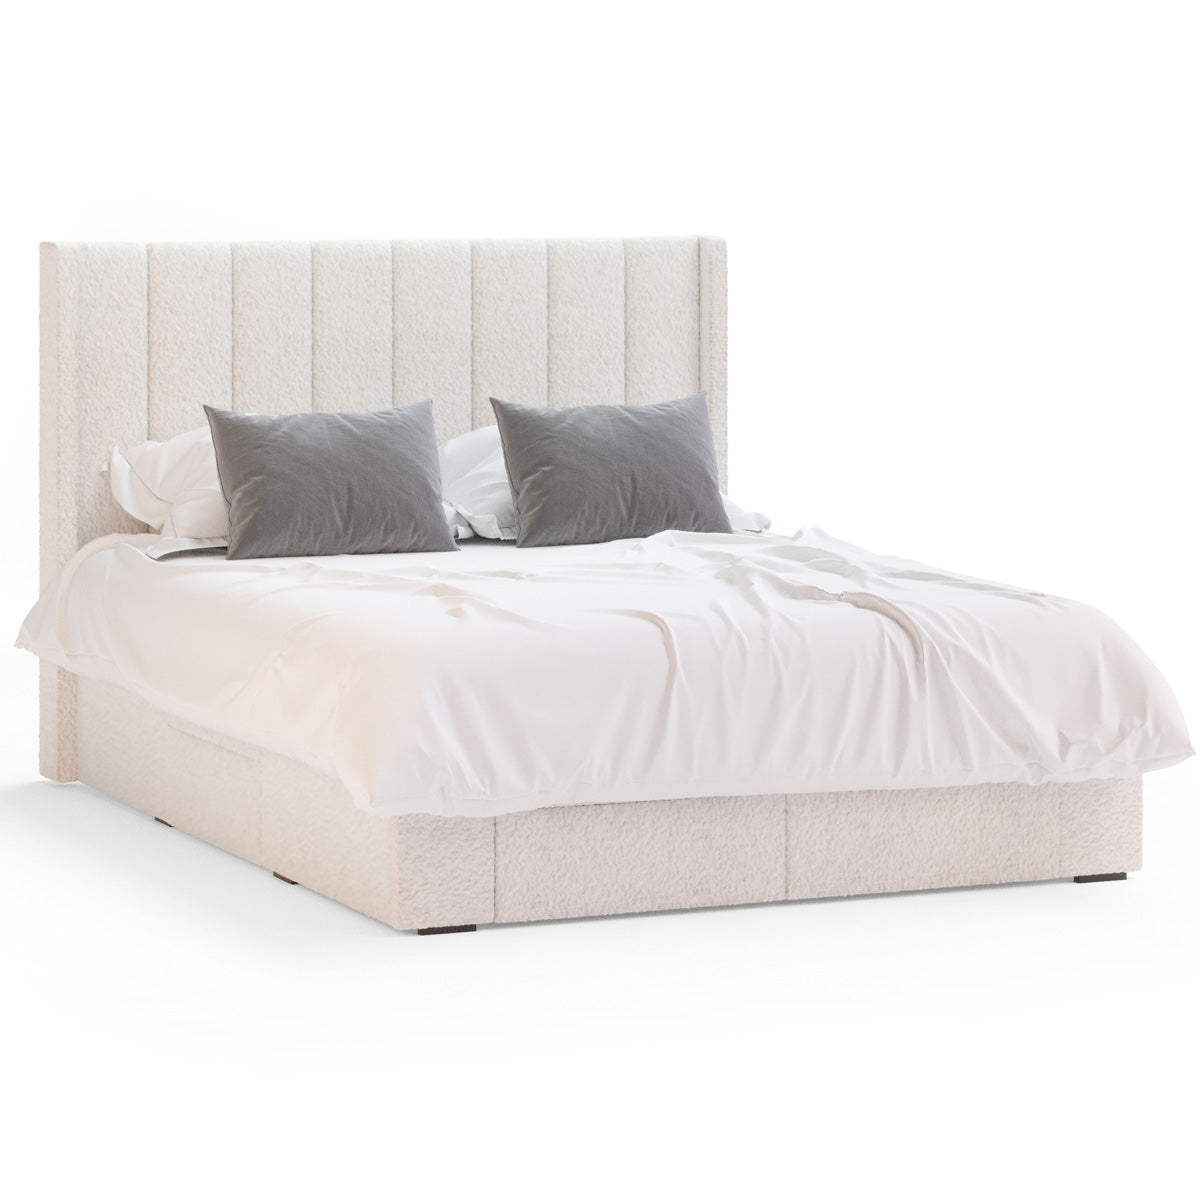 Emilie Winged Storage Bed Frame with Four Extra Large Drawers (Ivory White Boucle Fabric)